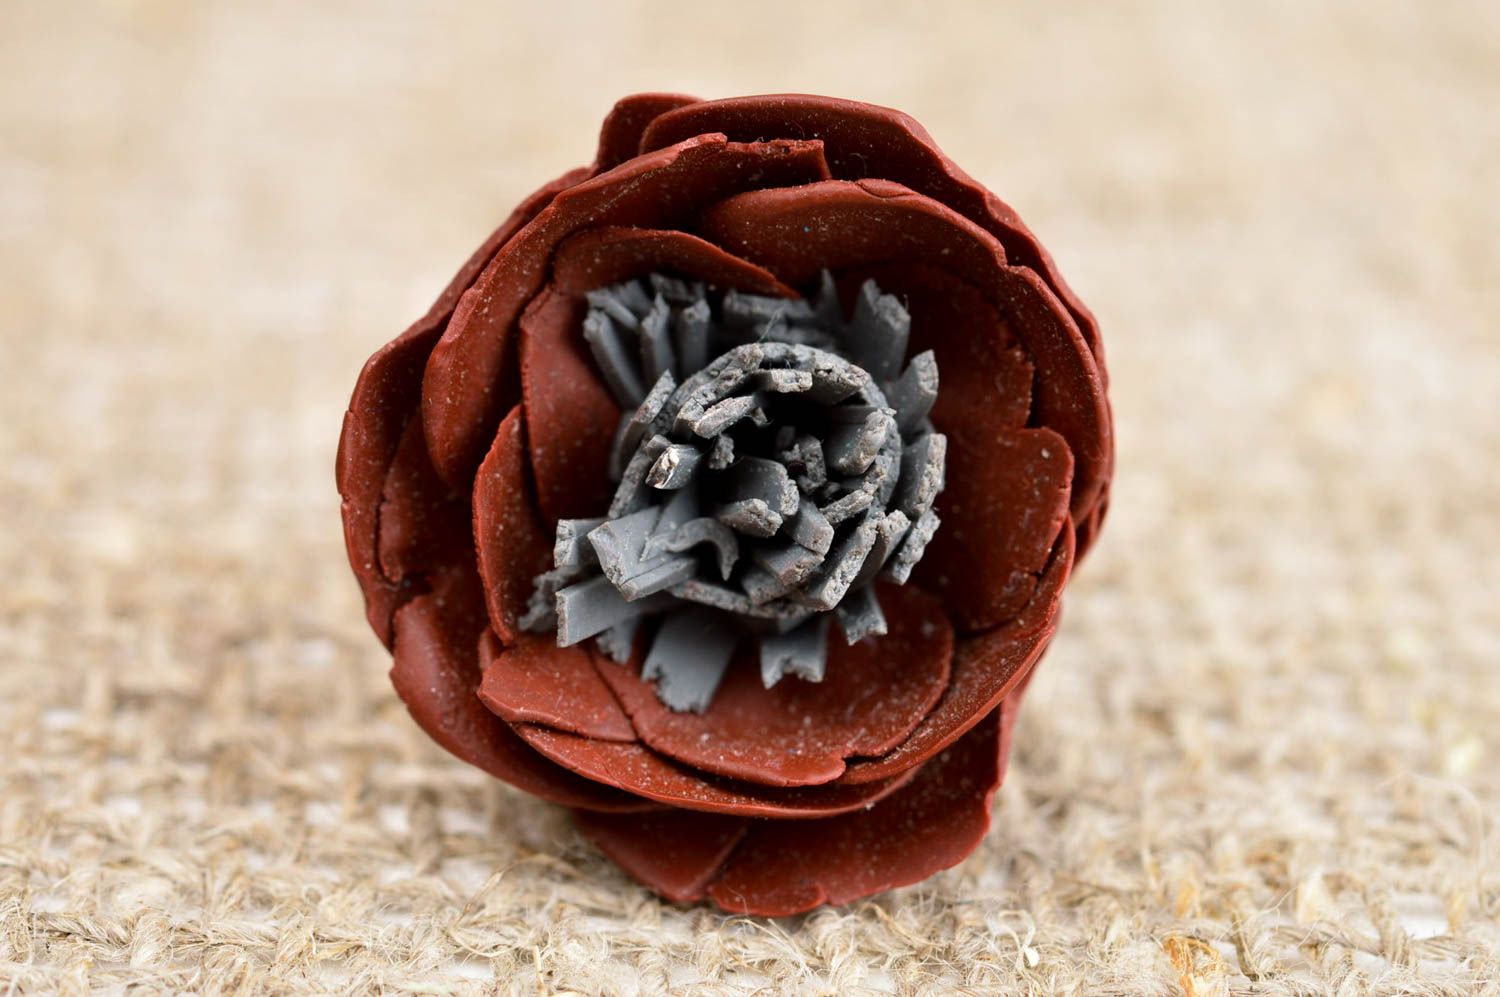 Unusual handmade flower ring cool jewelry designs polymer clay ideas small gifts photo 3